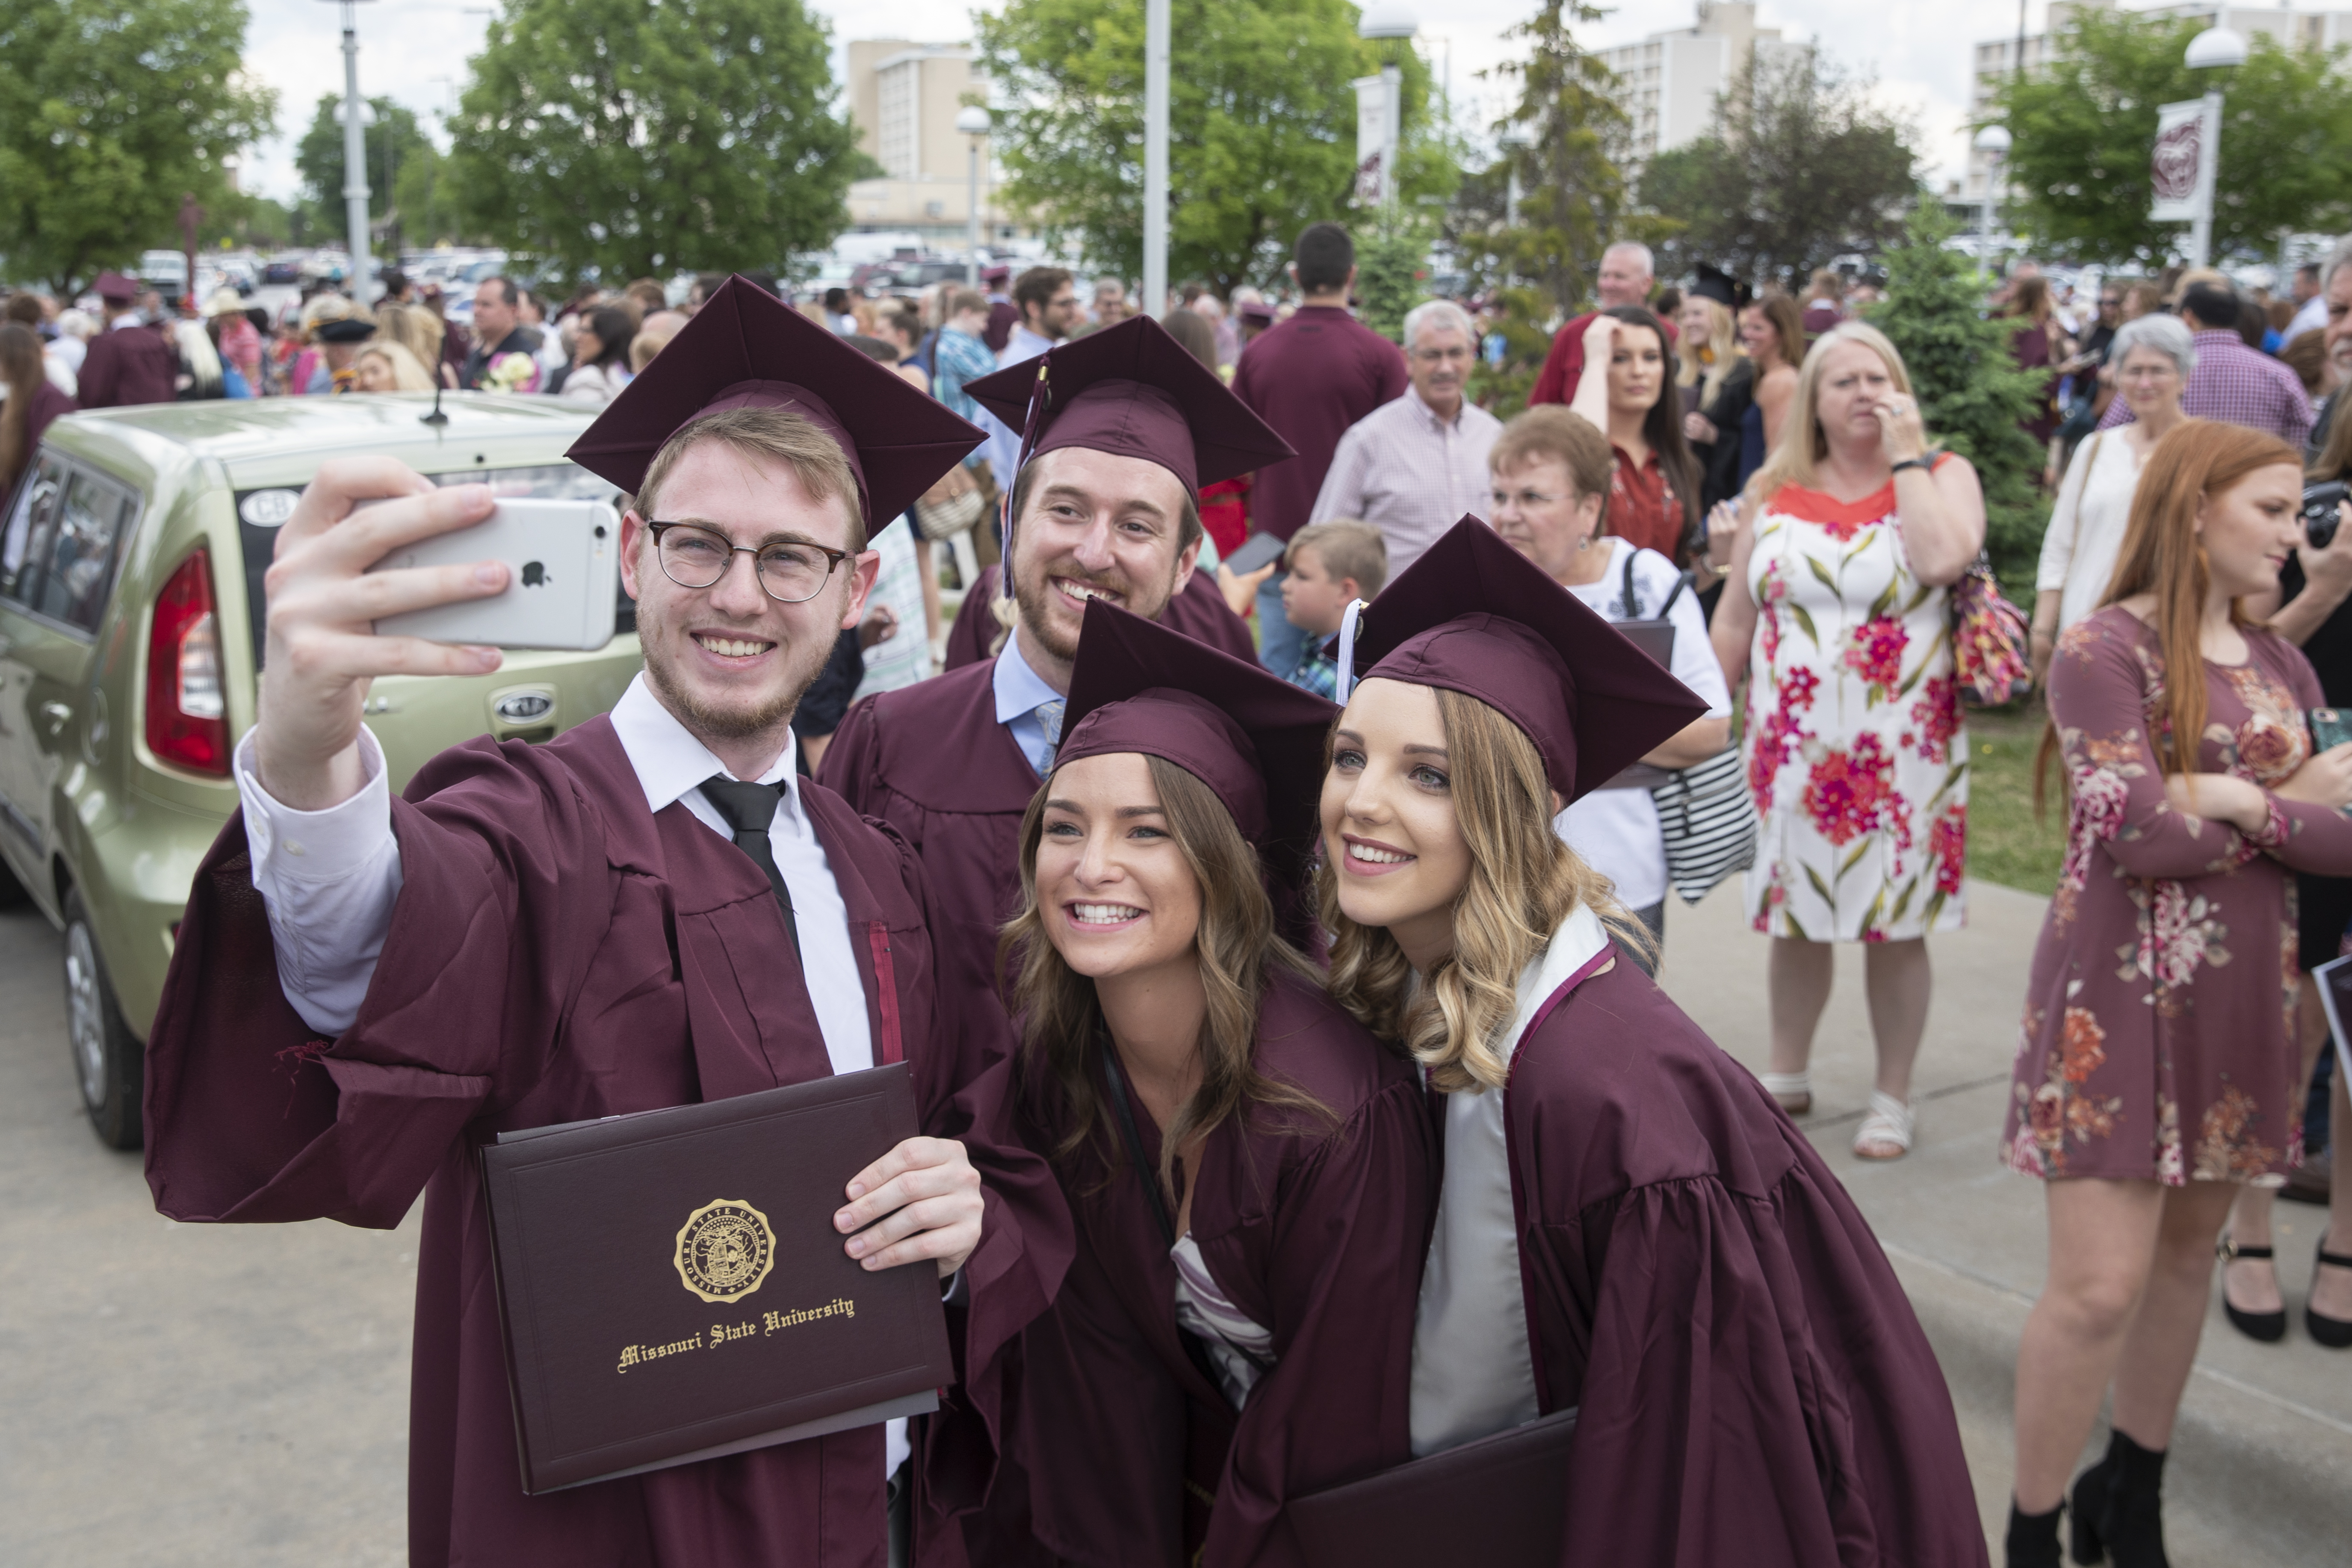 Missouri State graduates taking a selfie in their cap and gown